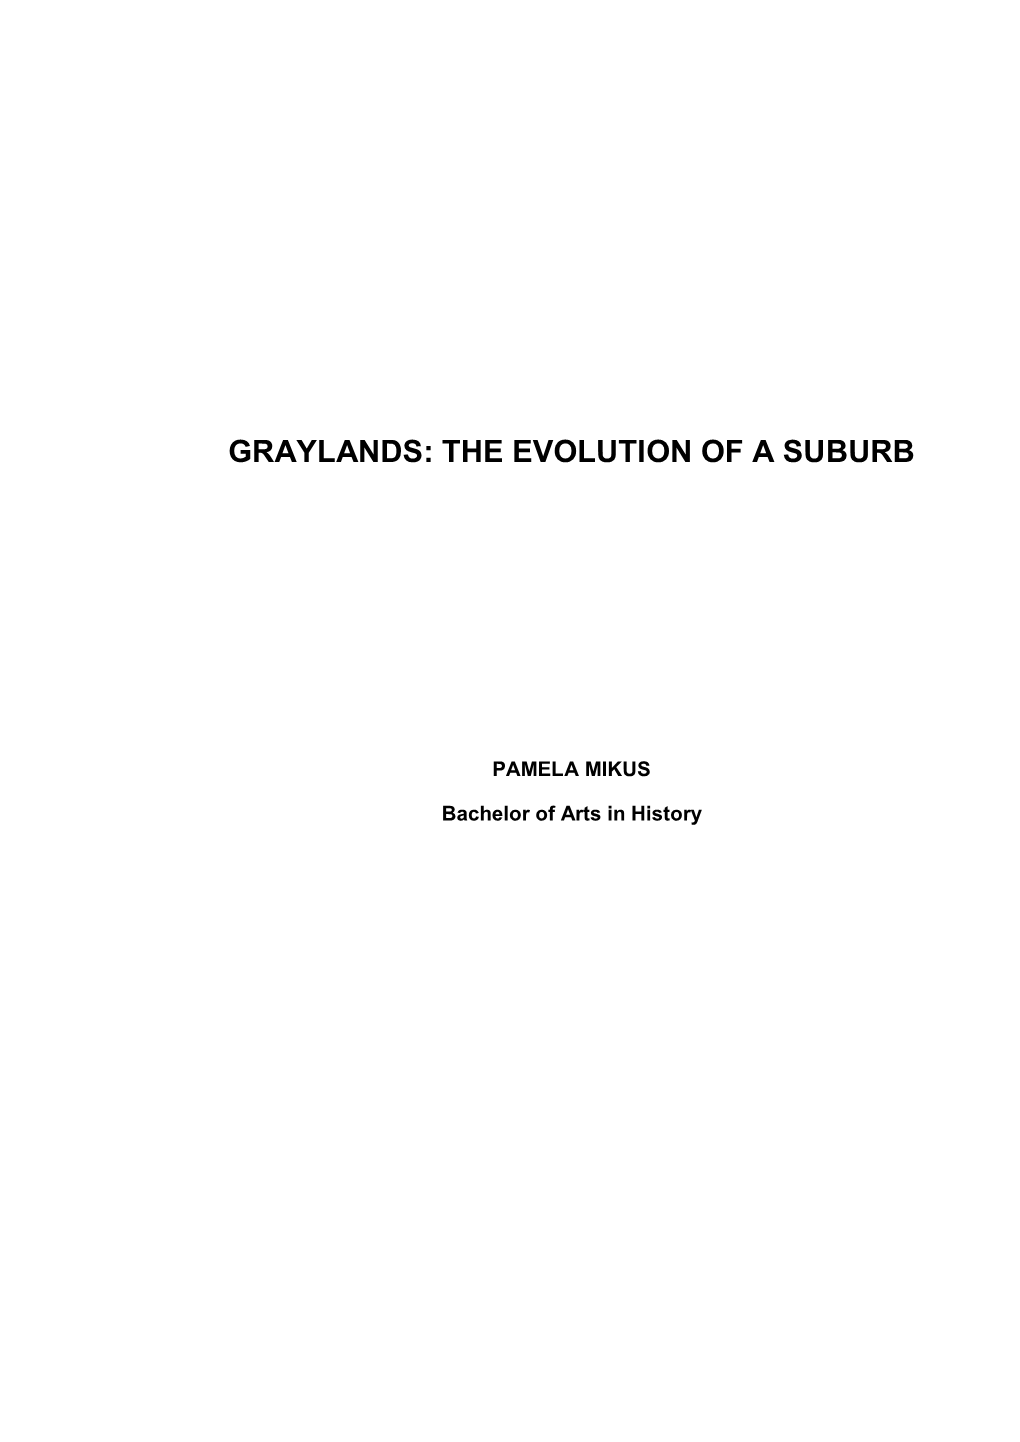 Graylands: the Evolution of a Suburb